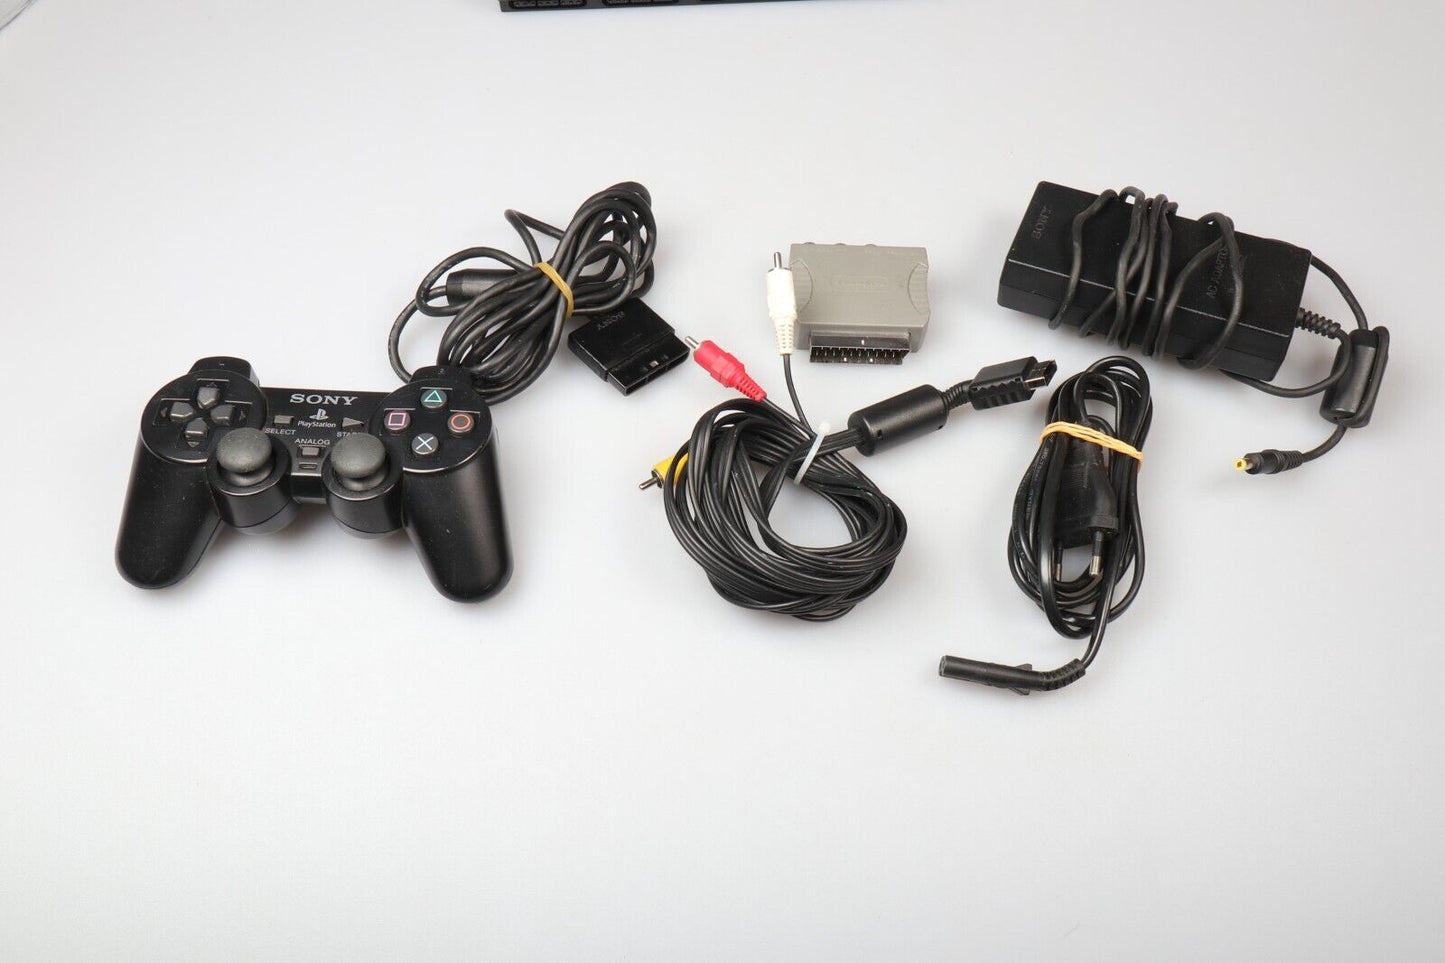 Playstation 2 Slim SCPH-75004 Bundle | 1 Controller + All cables | Tested